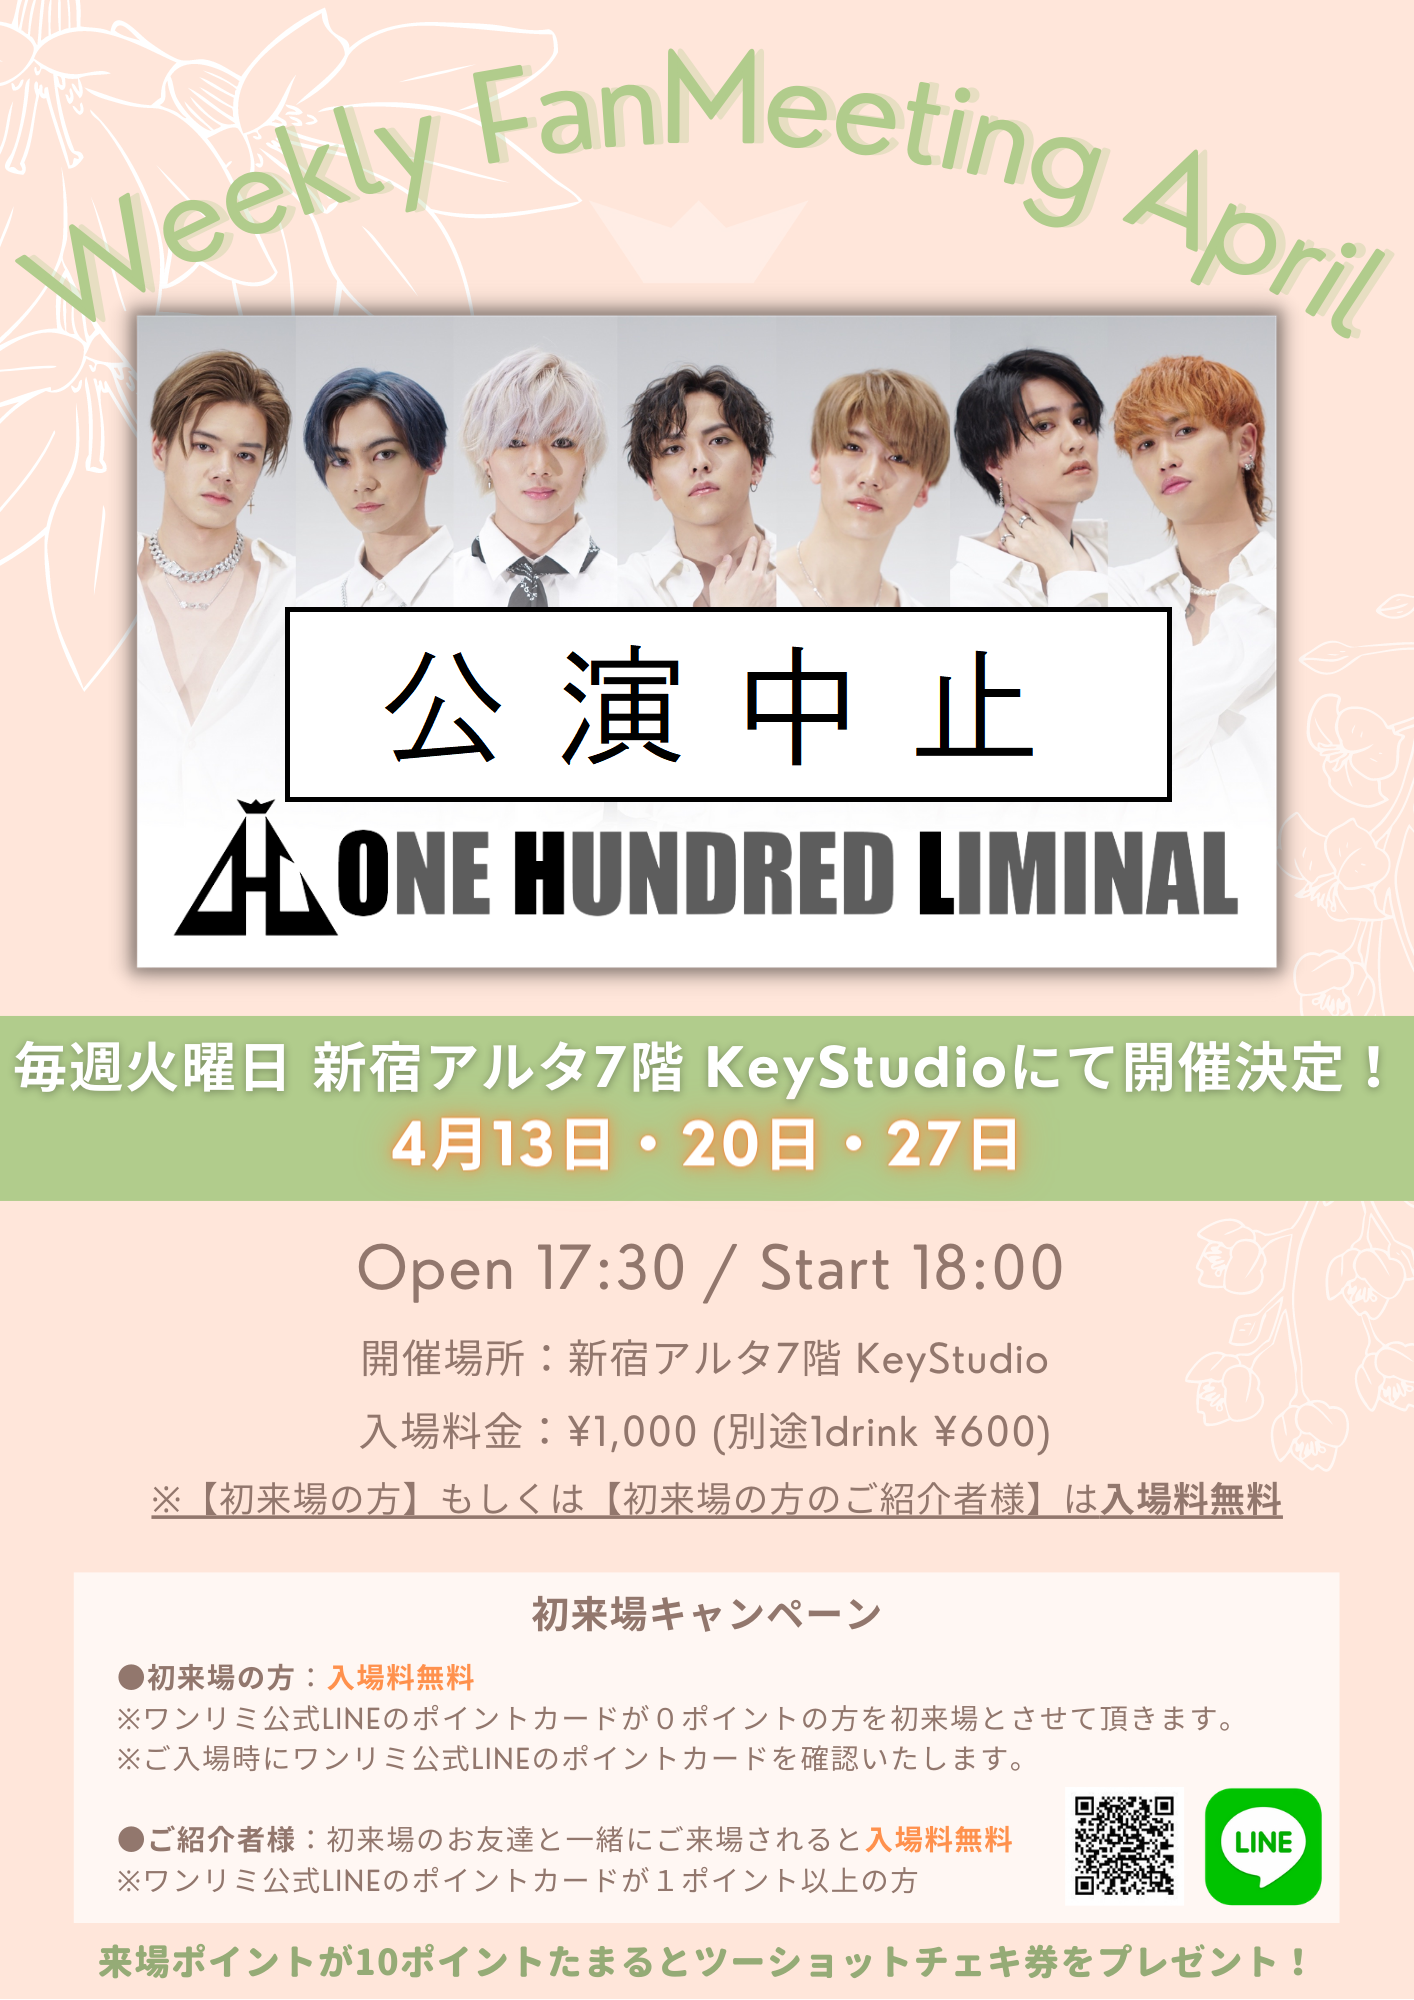 ONE HUNDRED LIMINAL -Weekly FanMeeting April-